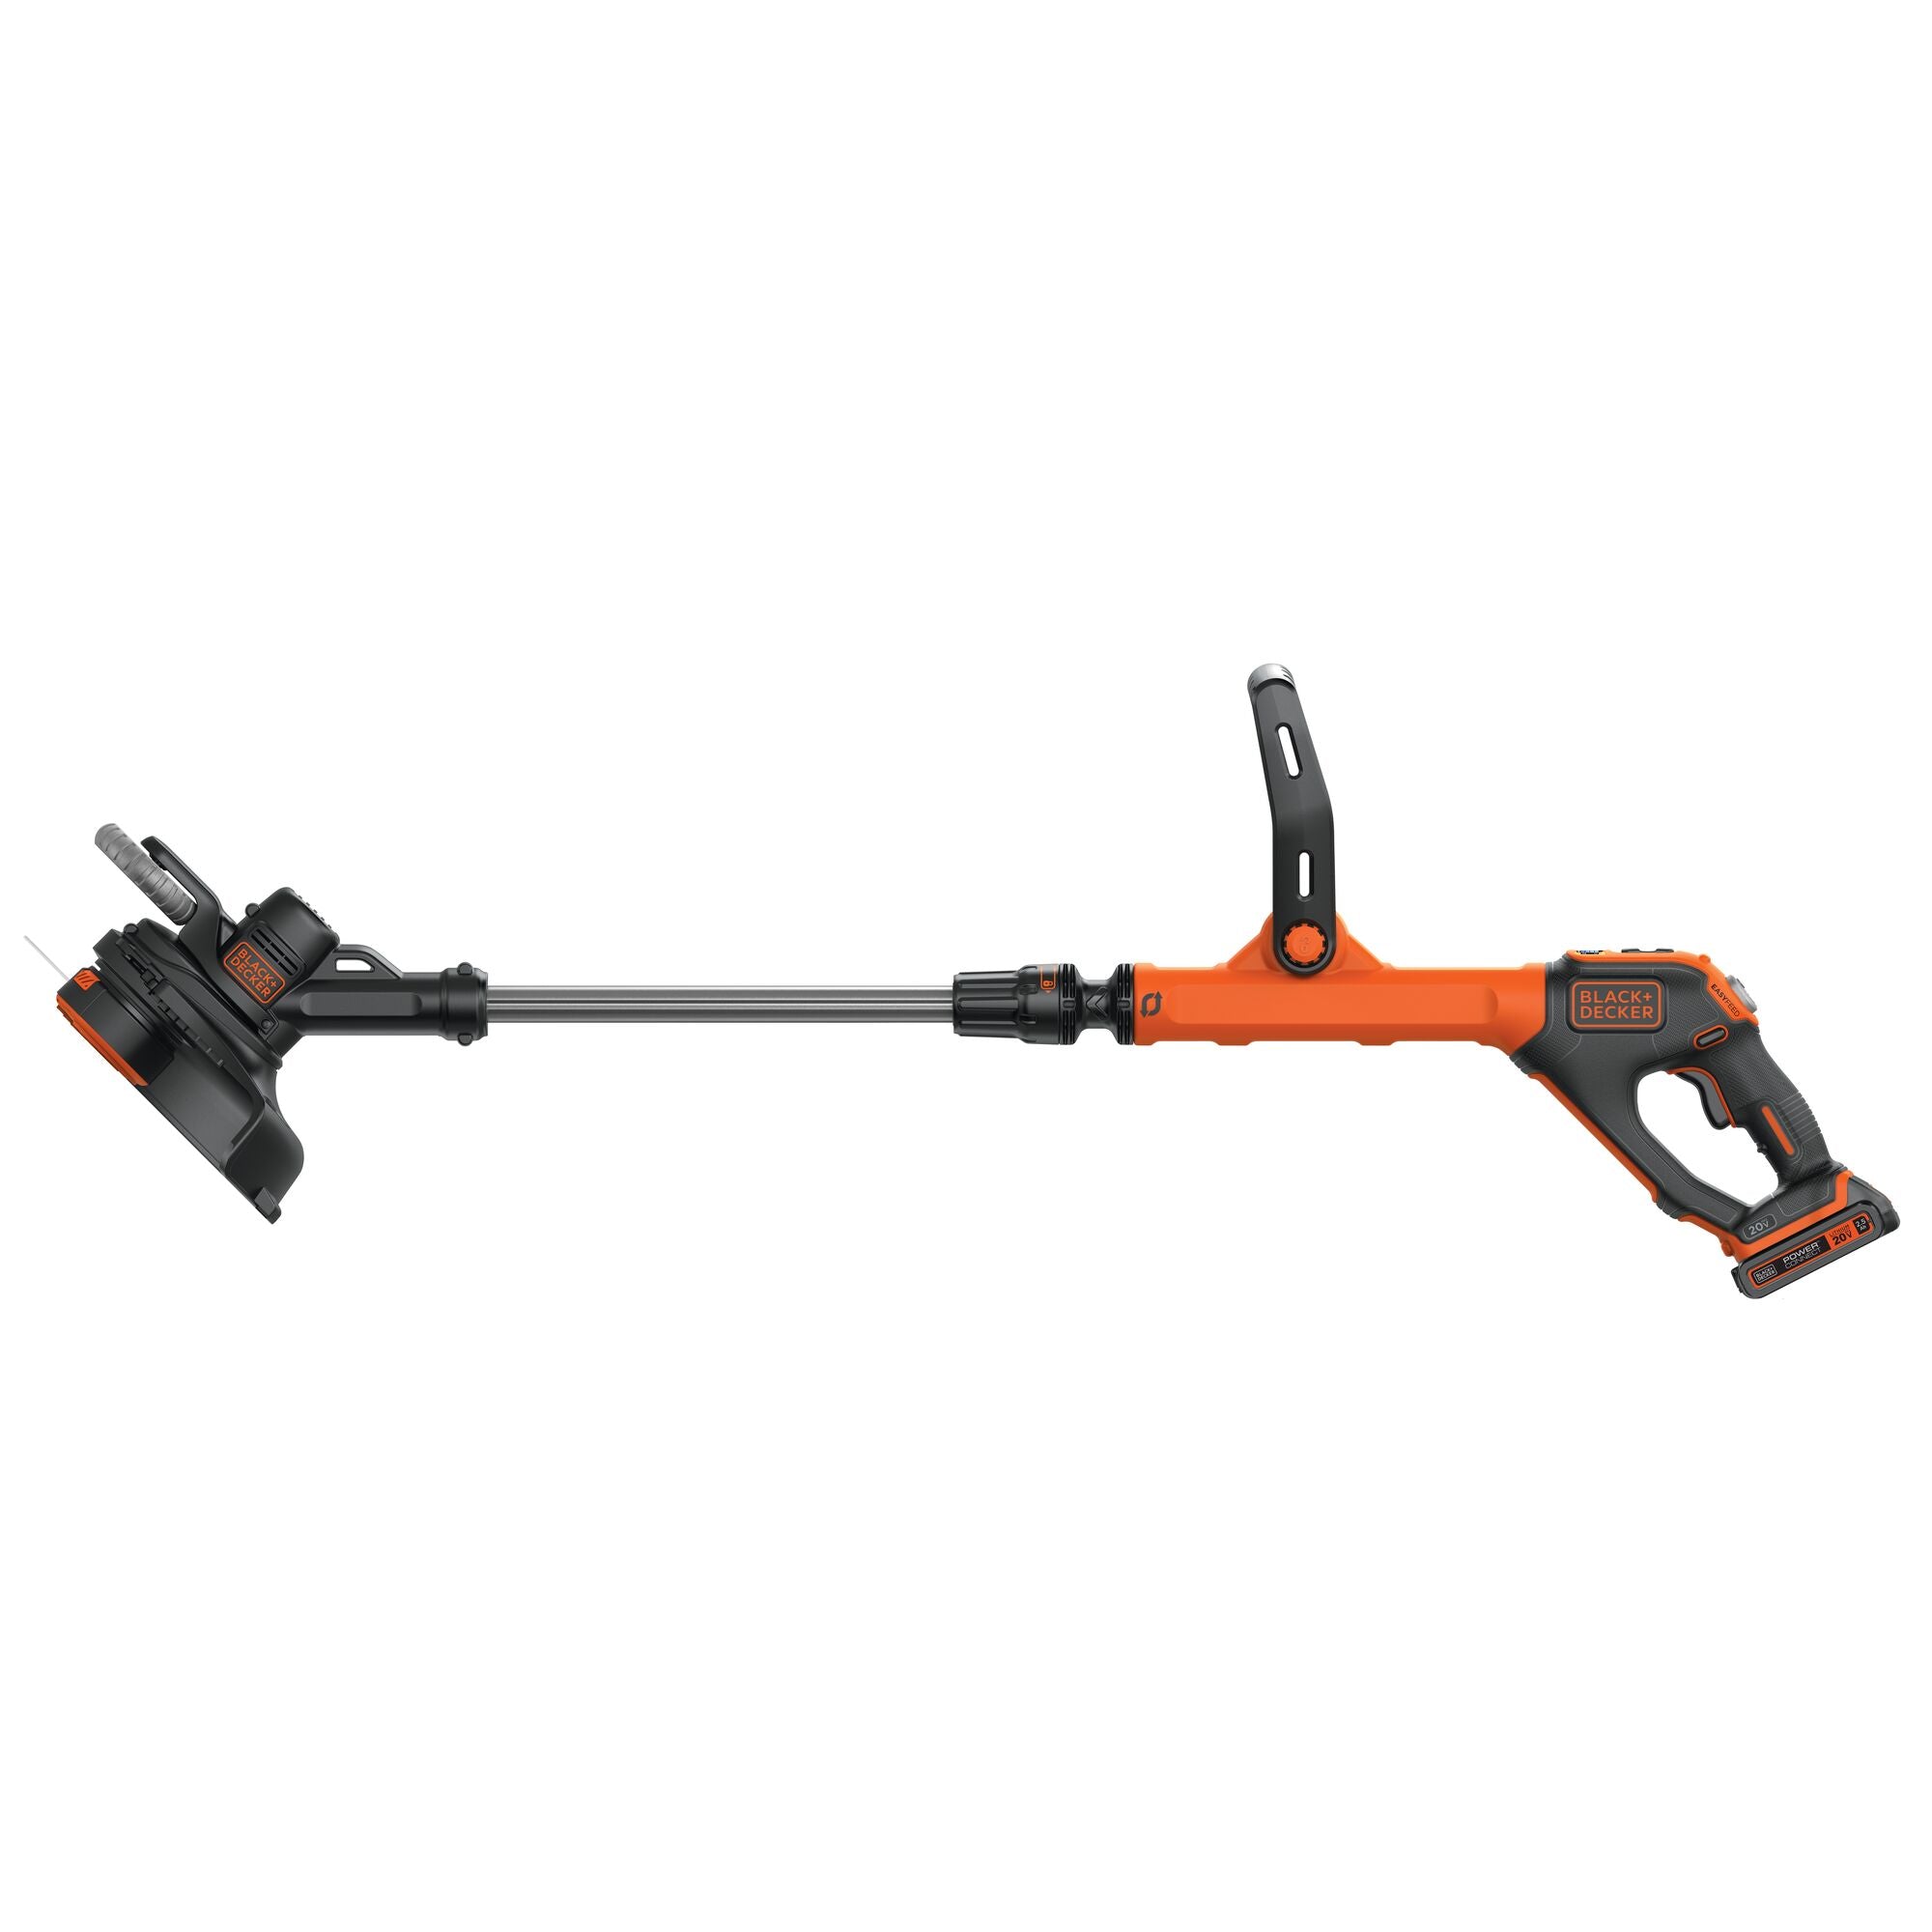 Black and Decker 3.5 Amp 12 in. 2-in-1 Trimmer/Edger (ST4500